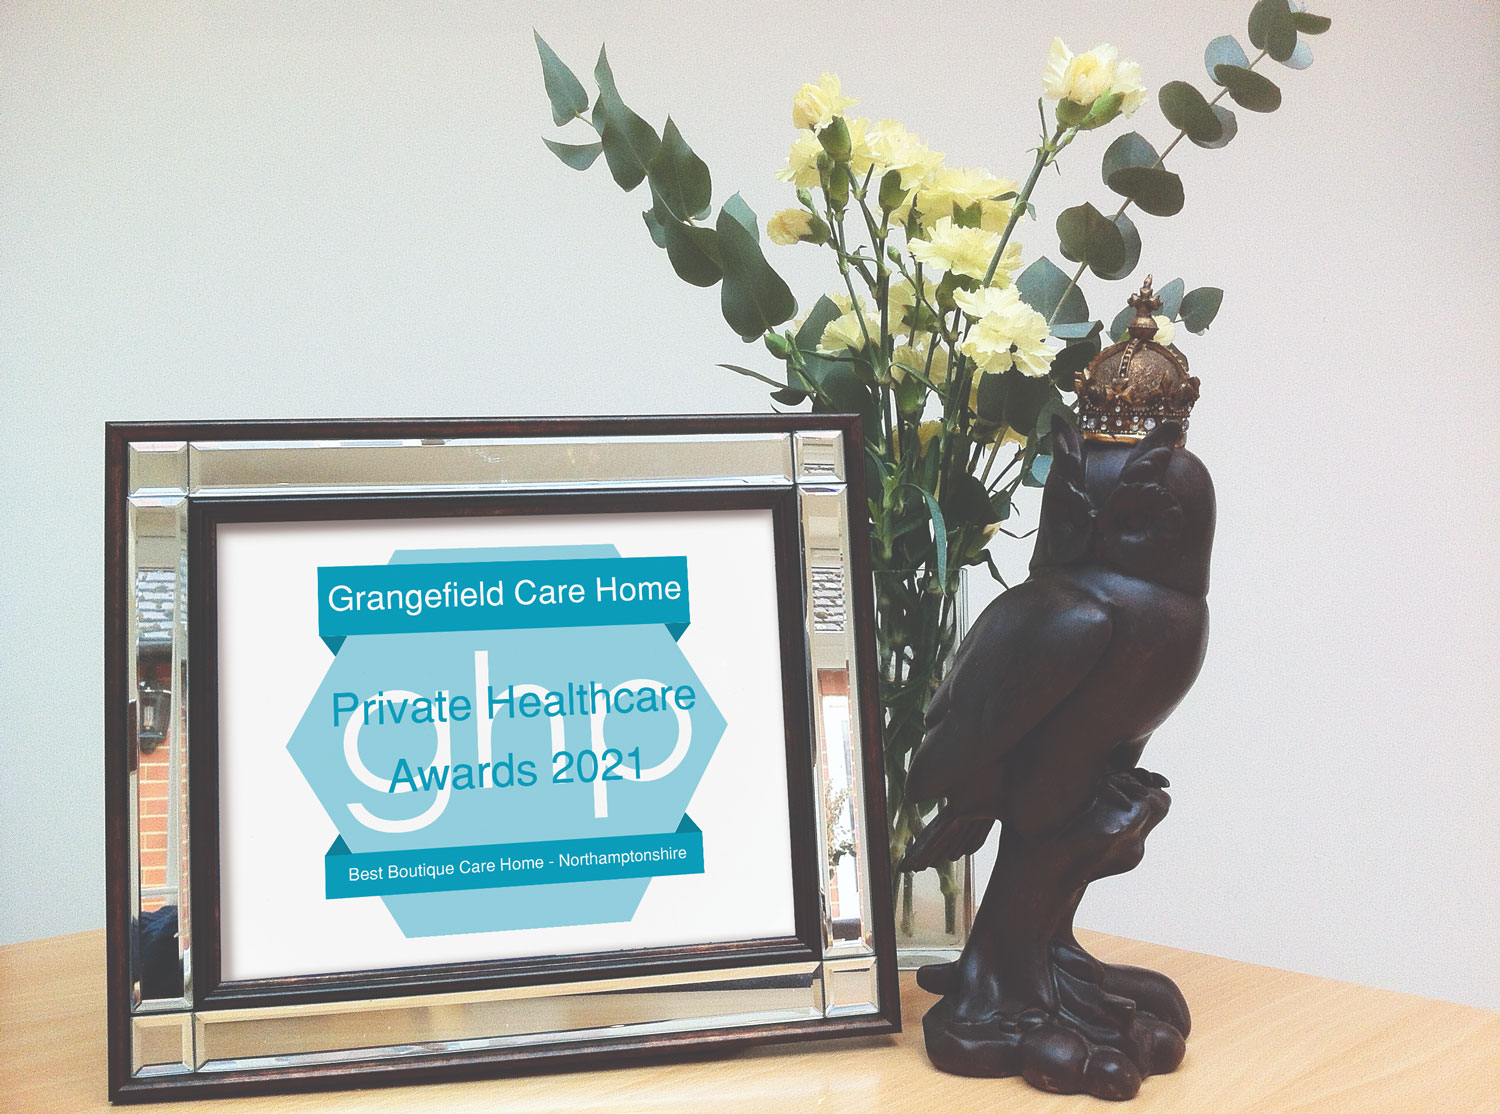 Social Care award certificate in frame next to statue.